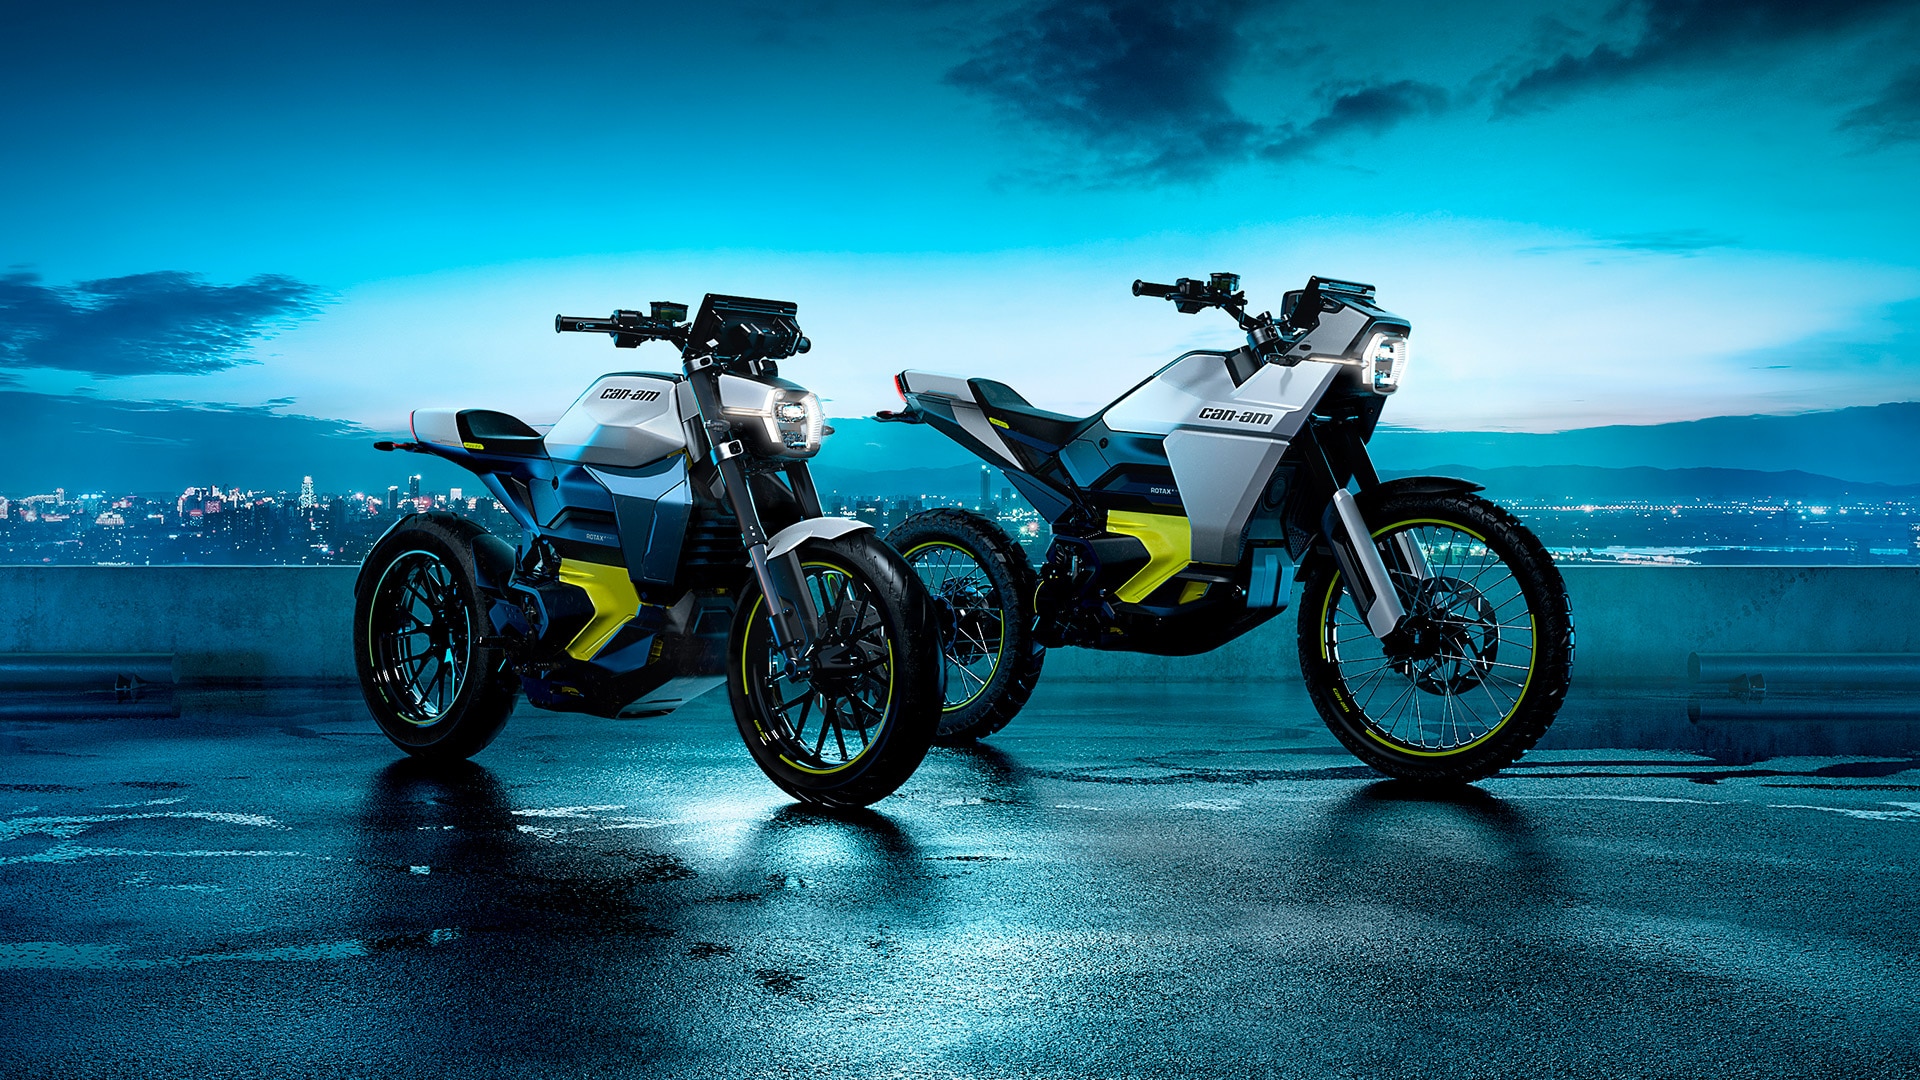 Can-Am motorcycles outdoors at night